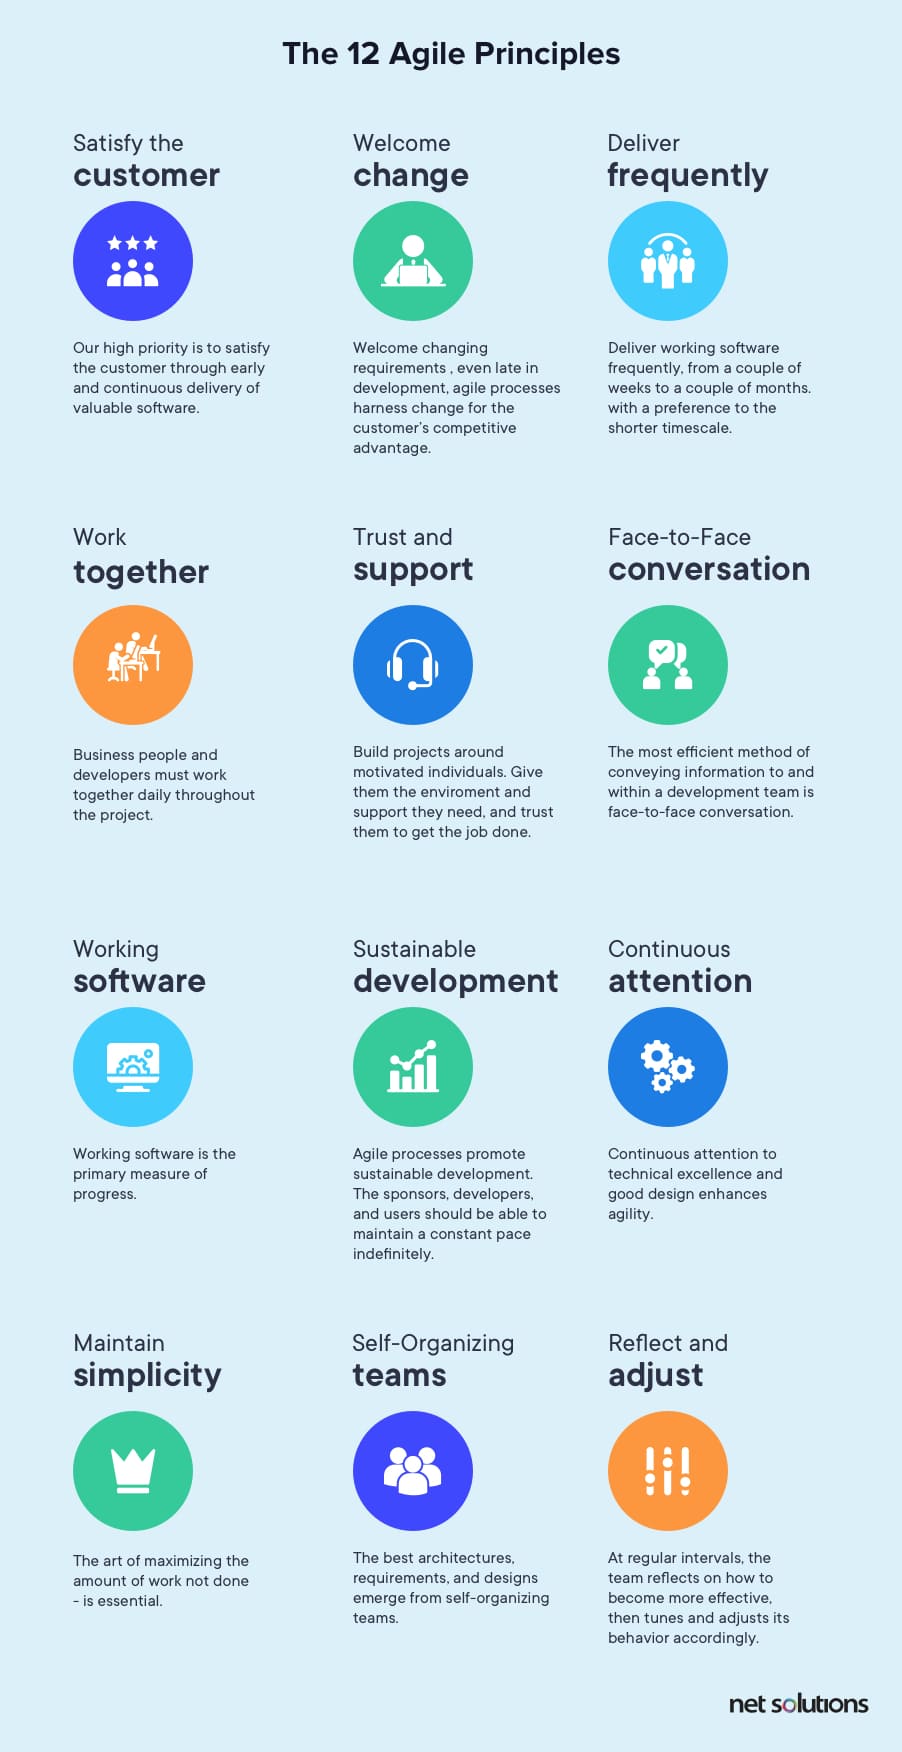 These are the 12 principles of Agile as mentioned in the Agile Manifesto